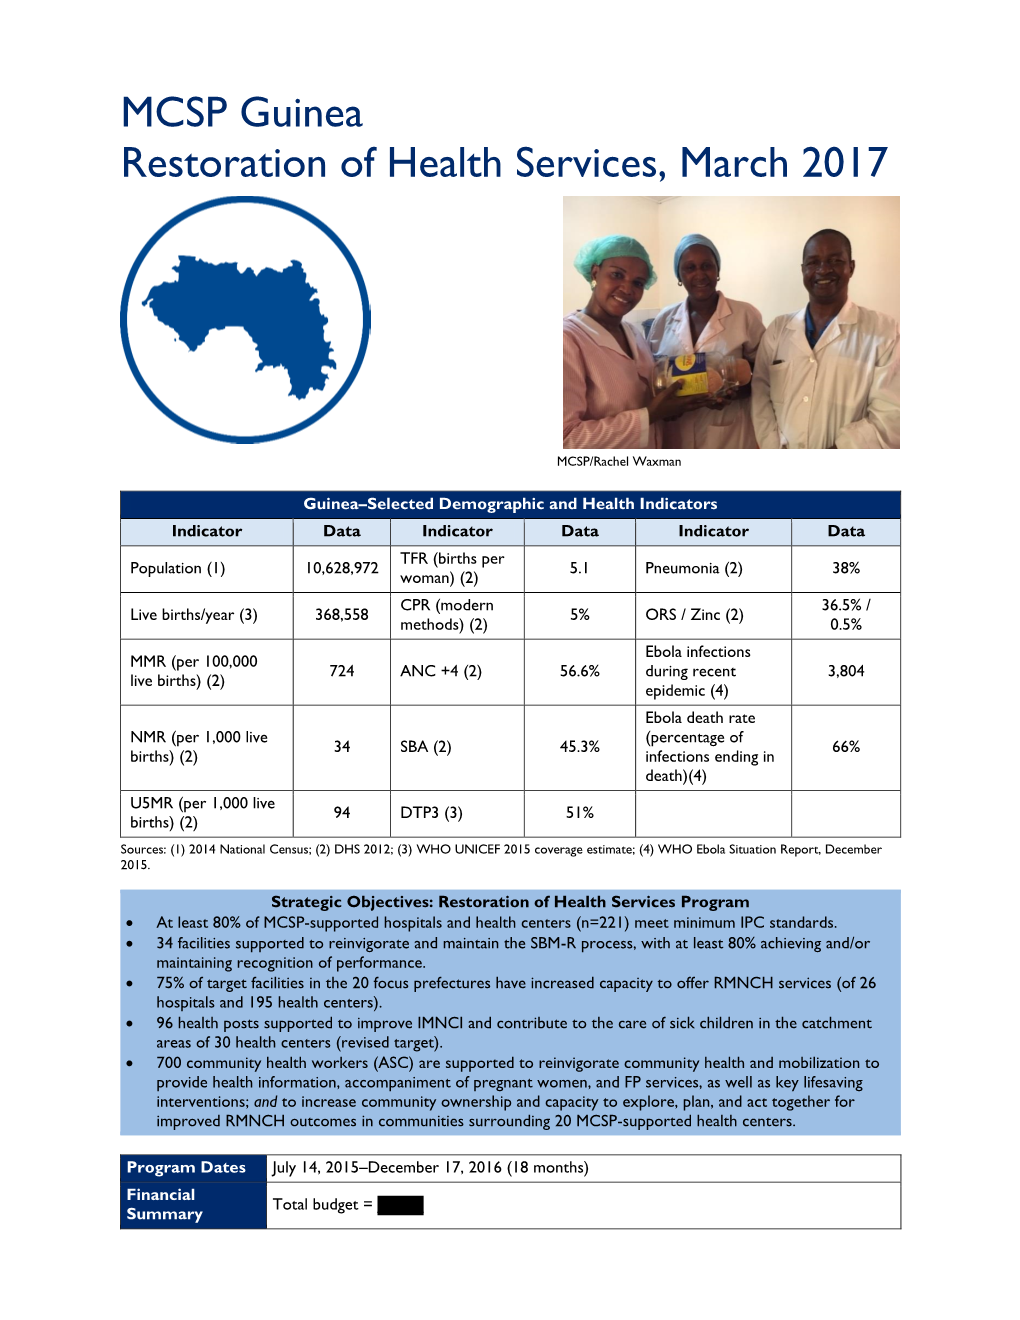 MCSP Guinea Restoration of Health Services, March 2017